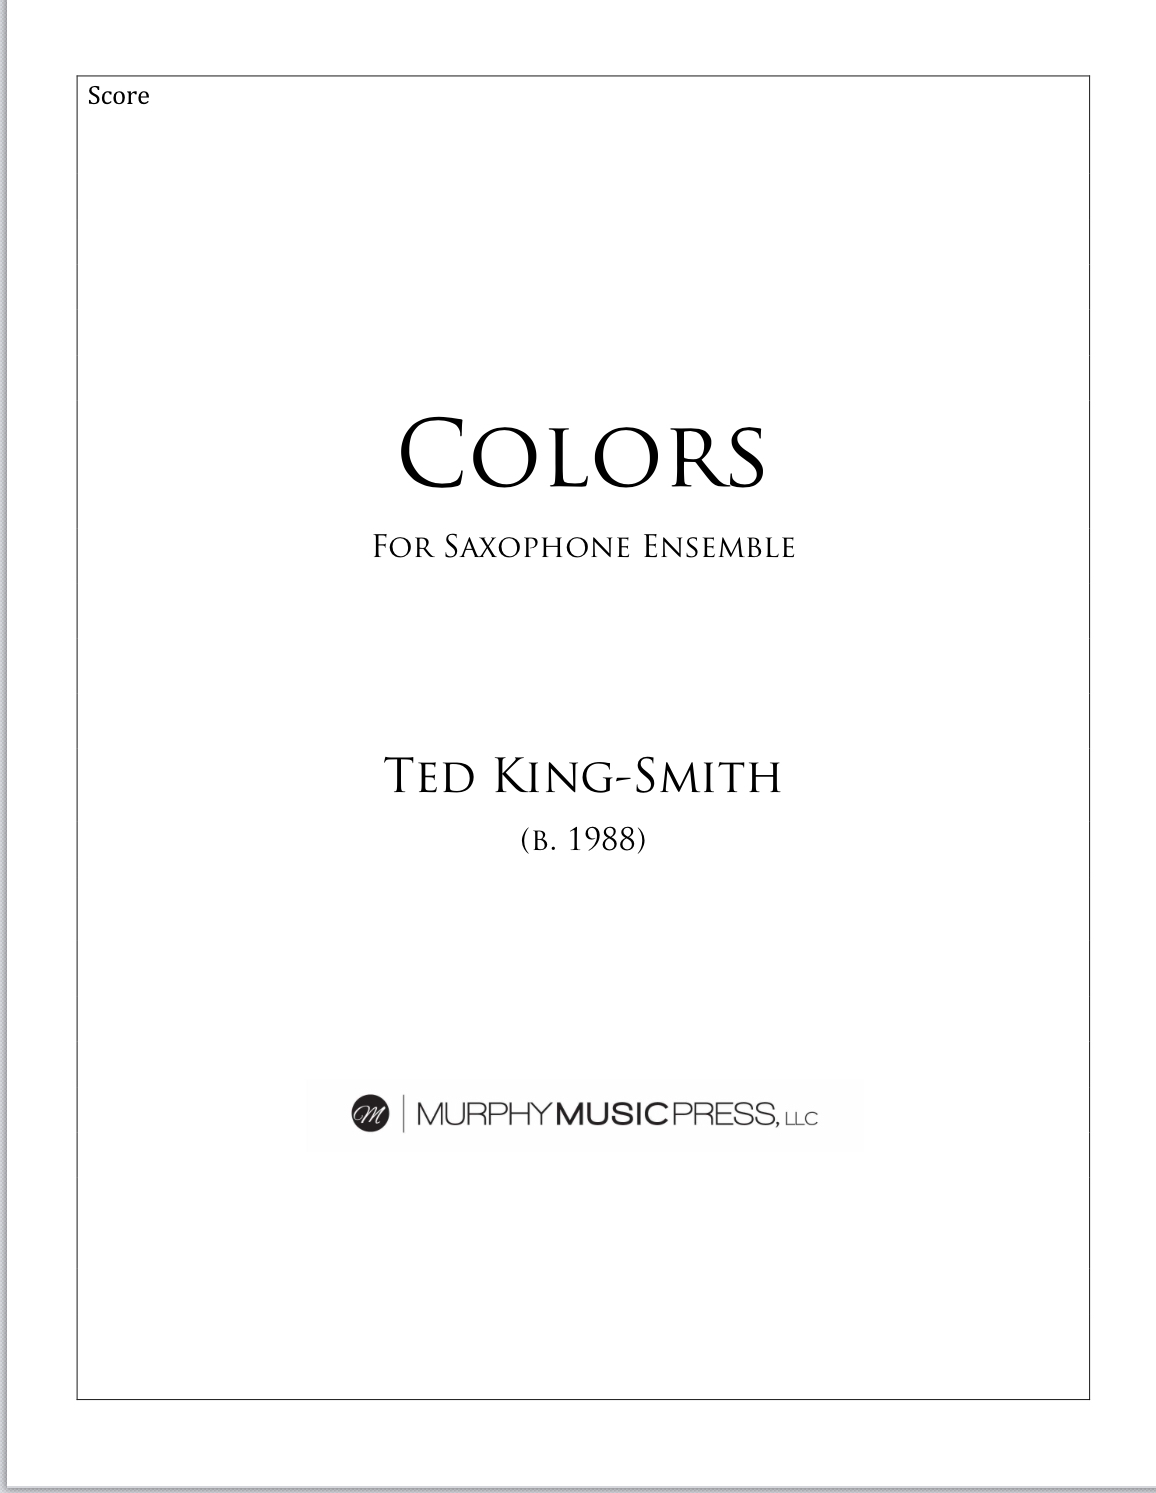 Colors For Saxophone Ensemble by Ted King-Smith